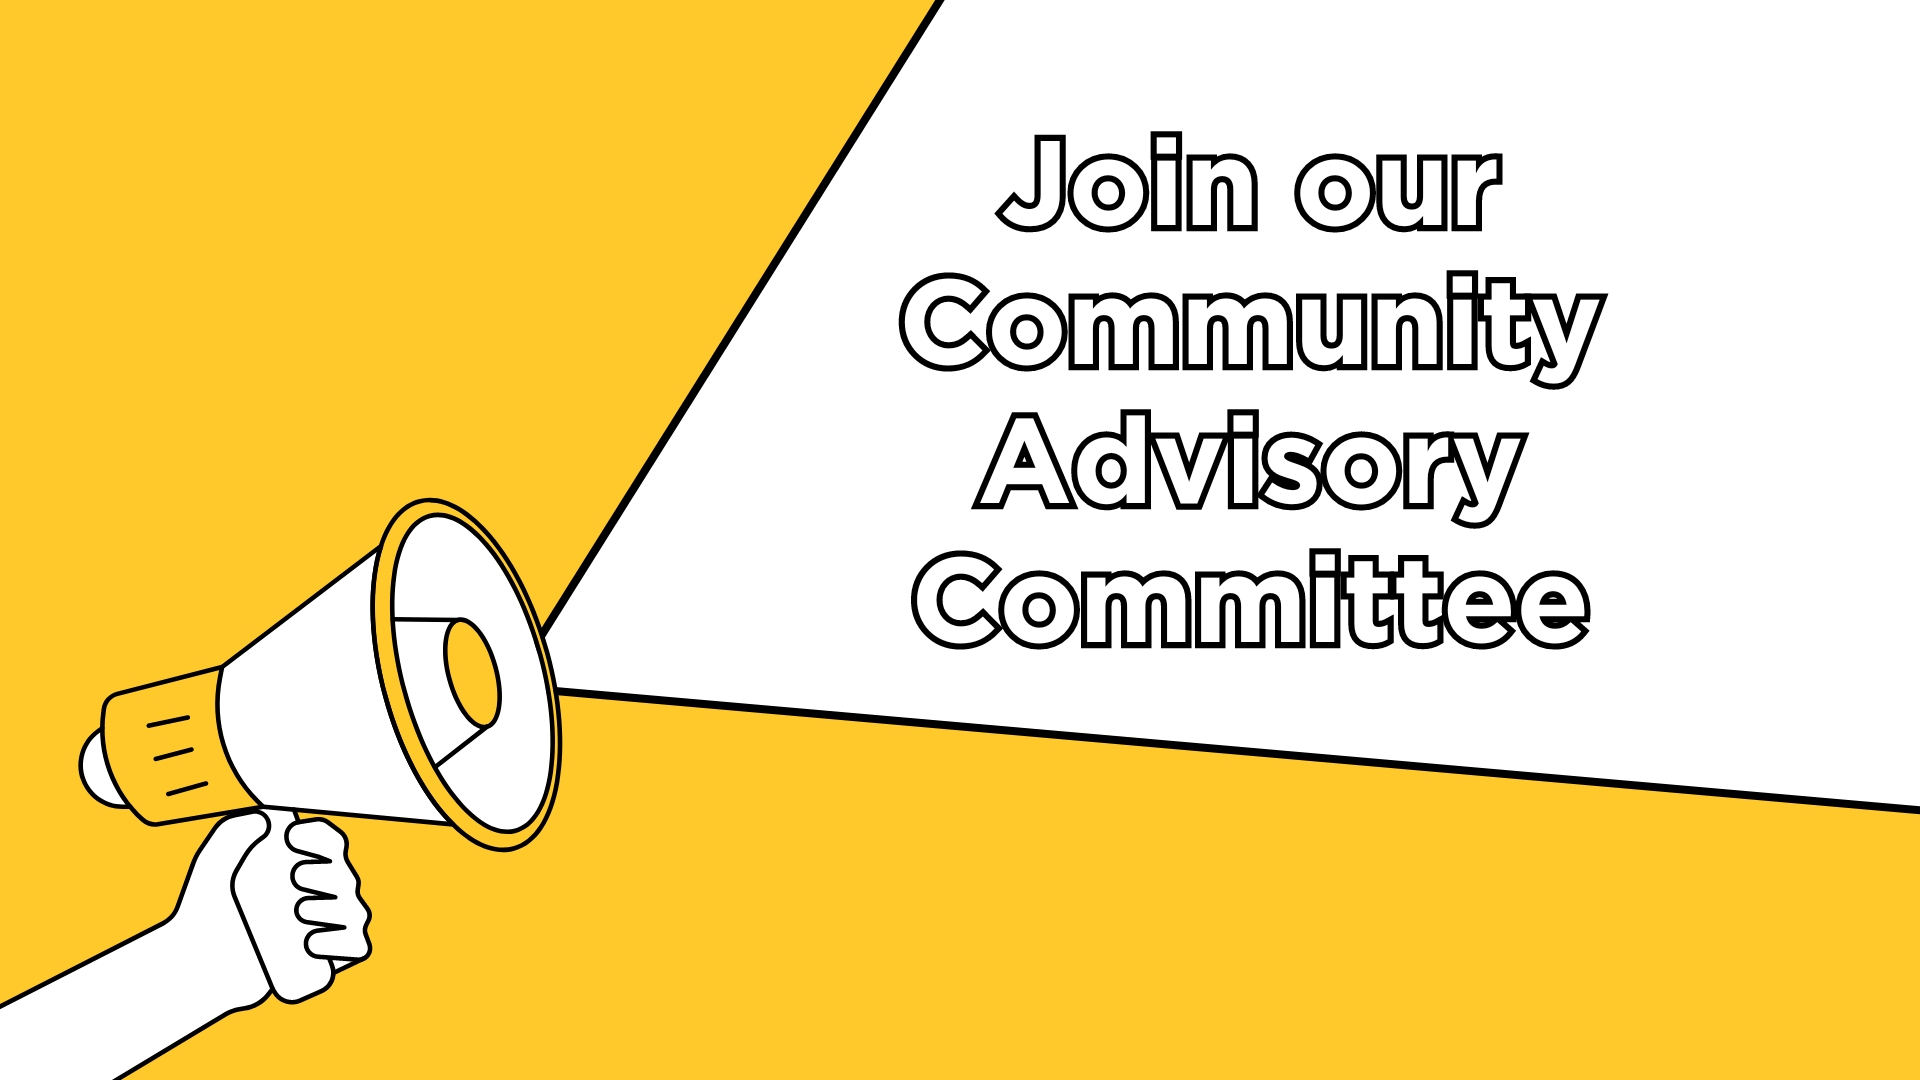 A graphic showing a bull horn with a speech bubble emitting from it. In the speech bubble are the words "Join our Community Advisory Committee."